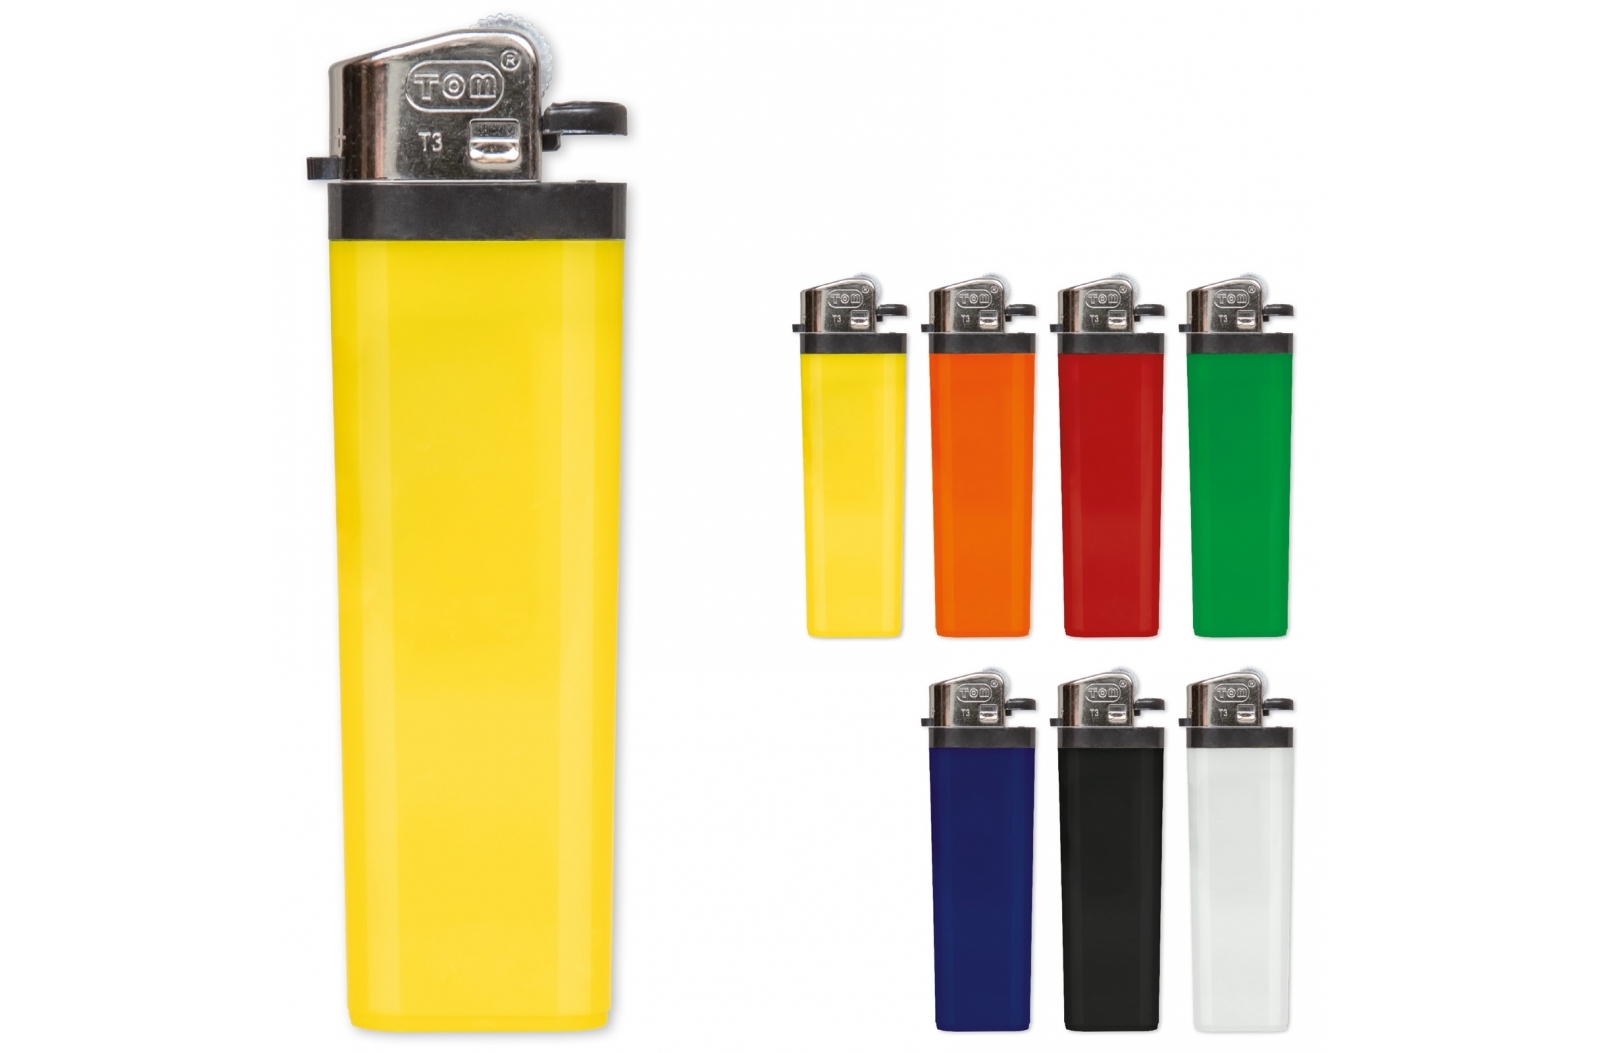 A disposable lighter that is designed to be resistant to use by children - Beddgelert